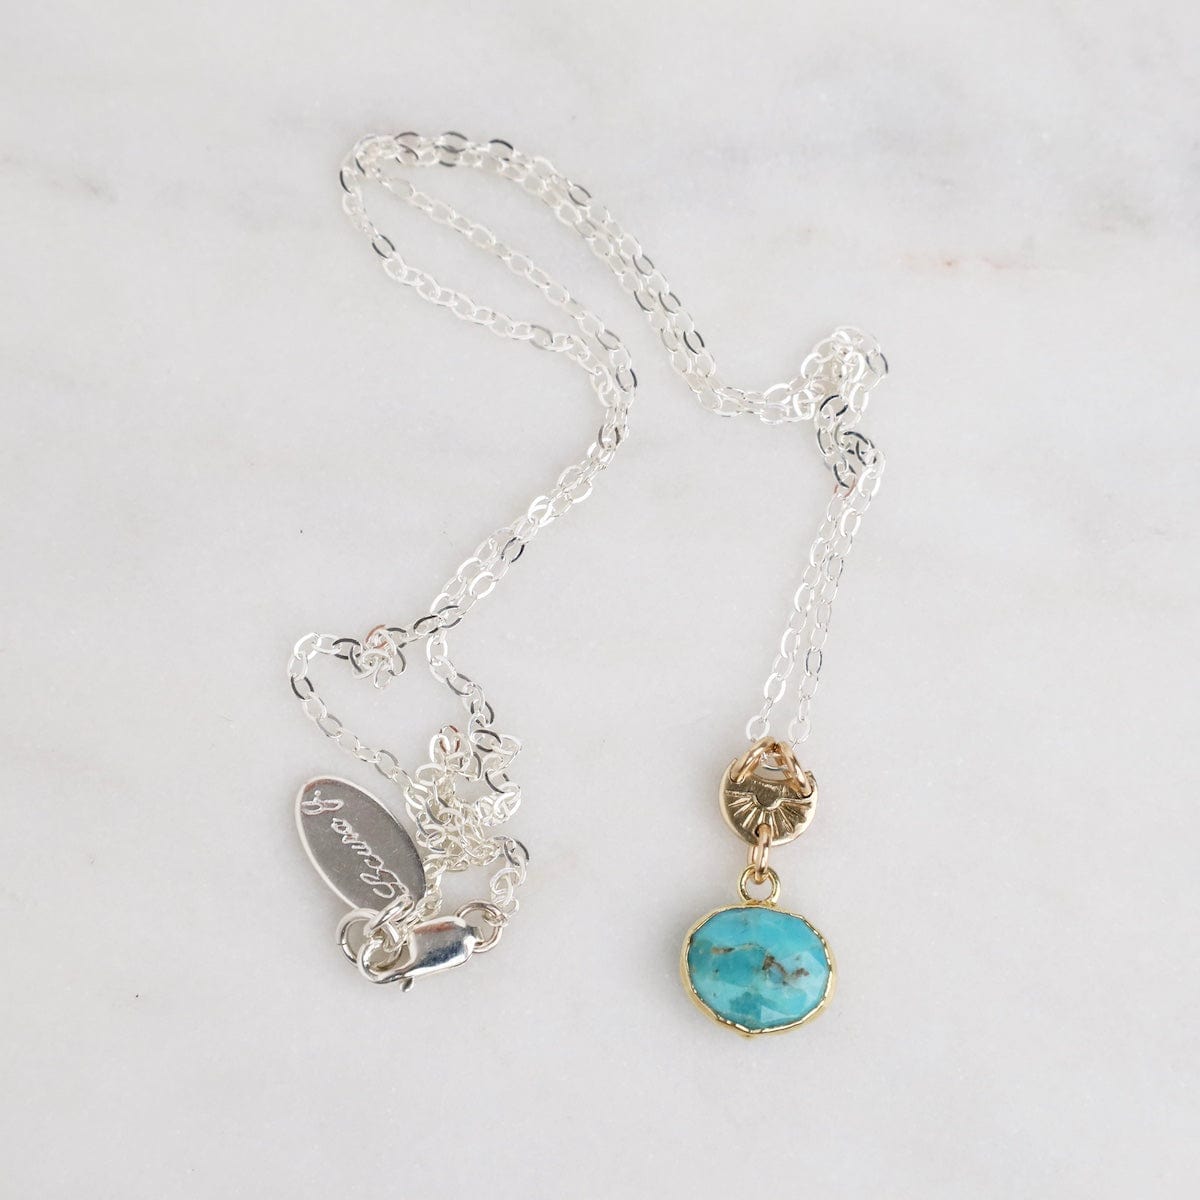 NKL-GF Small Turquoise Pendant Necklace